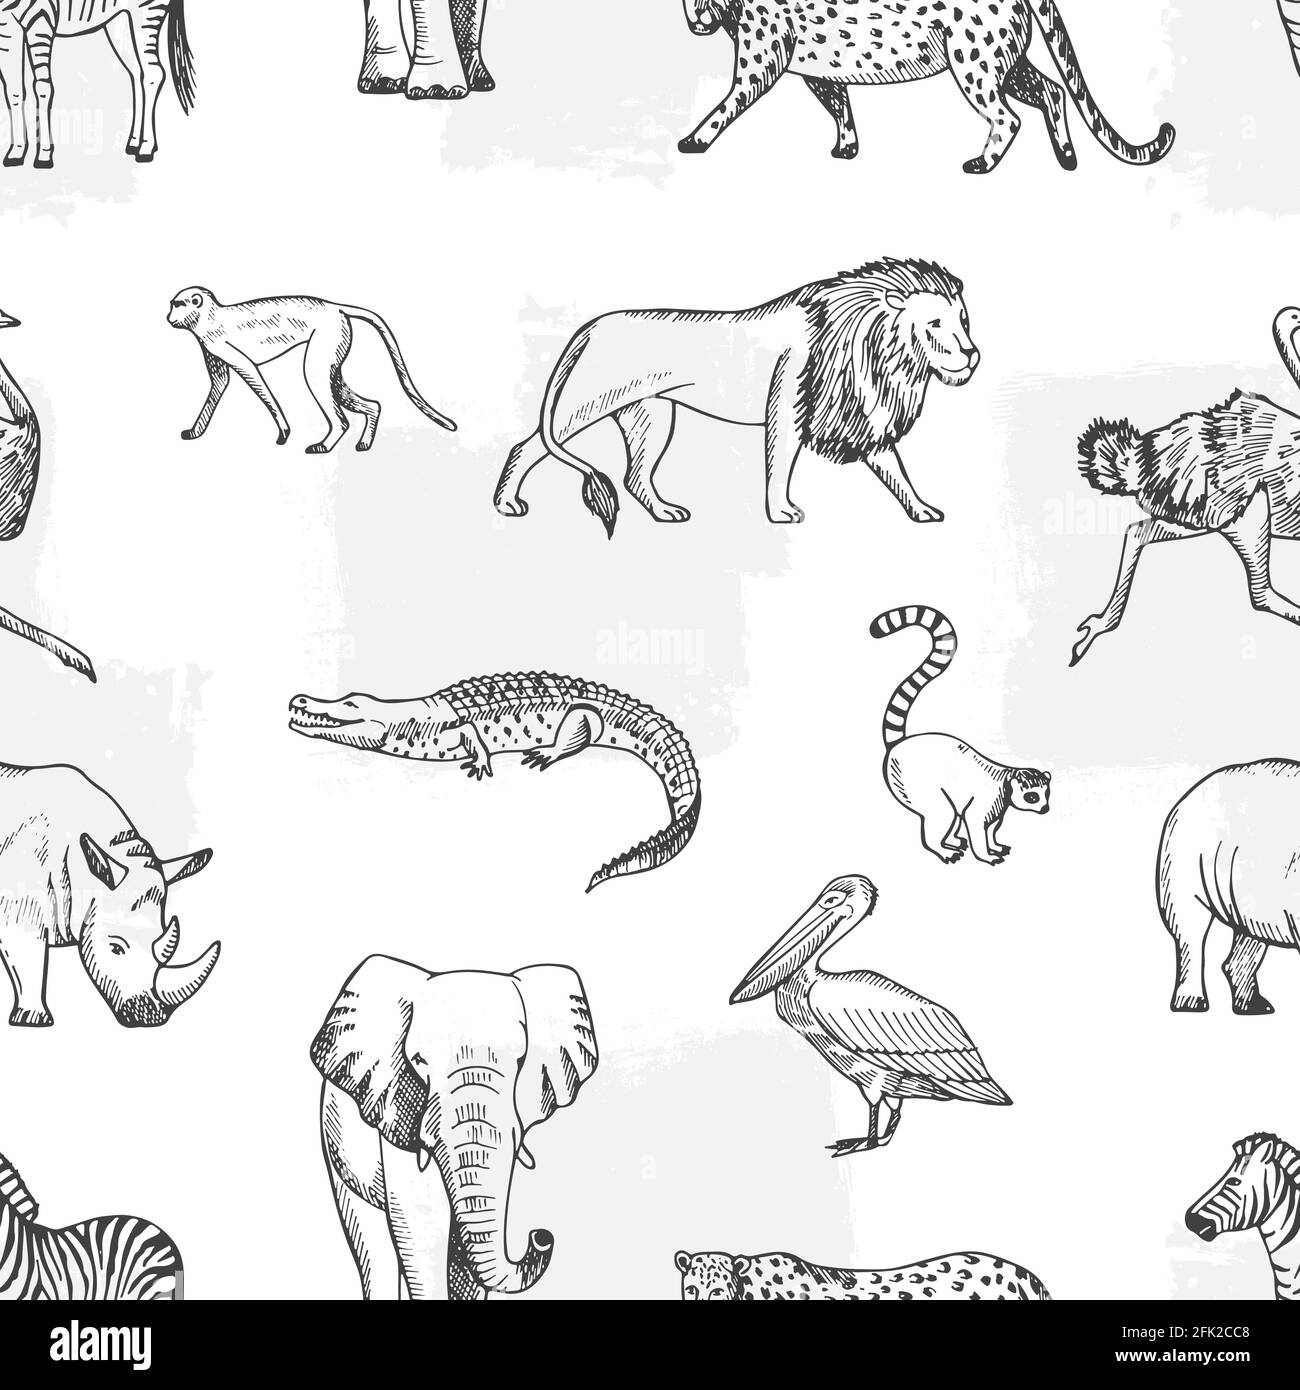 Sketch animal pattern. African, asian fauna background. Elephant ...